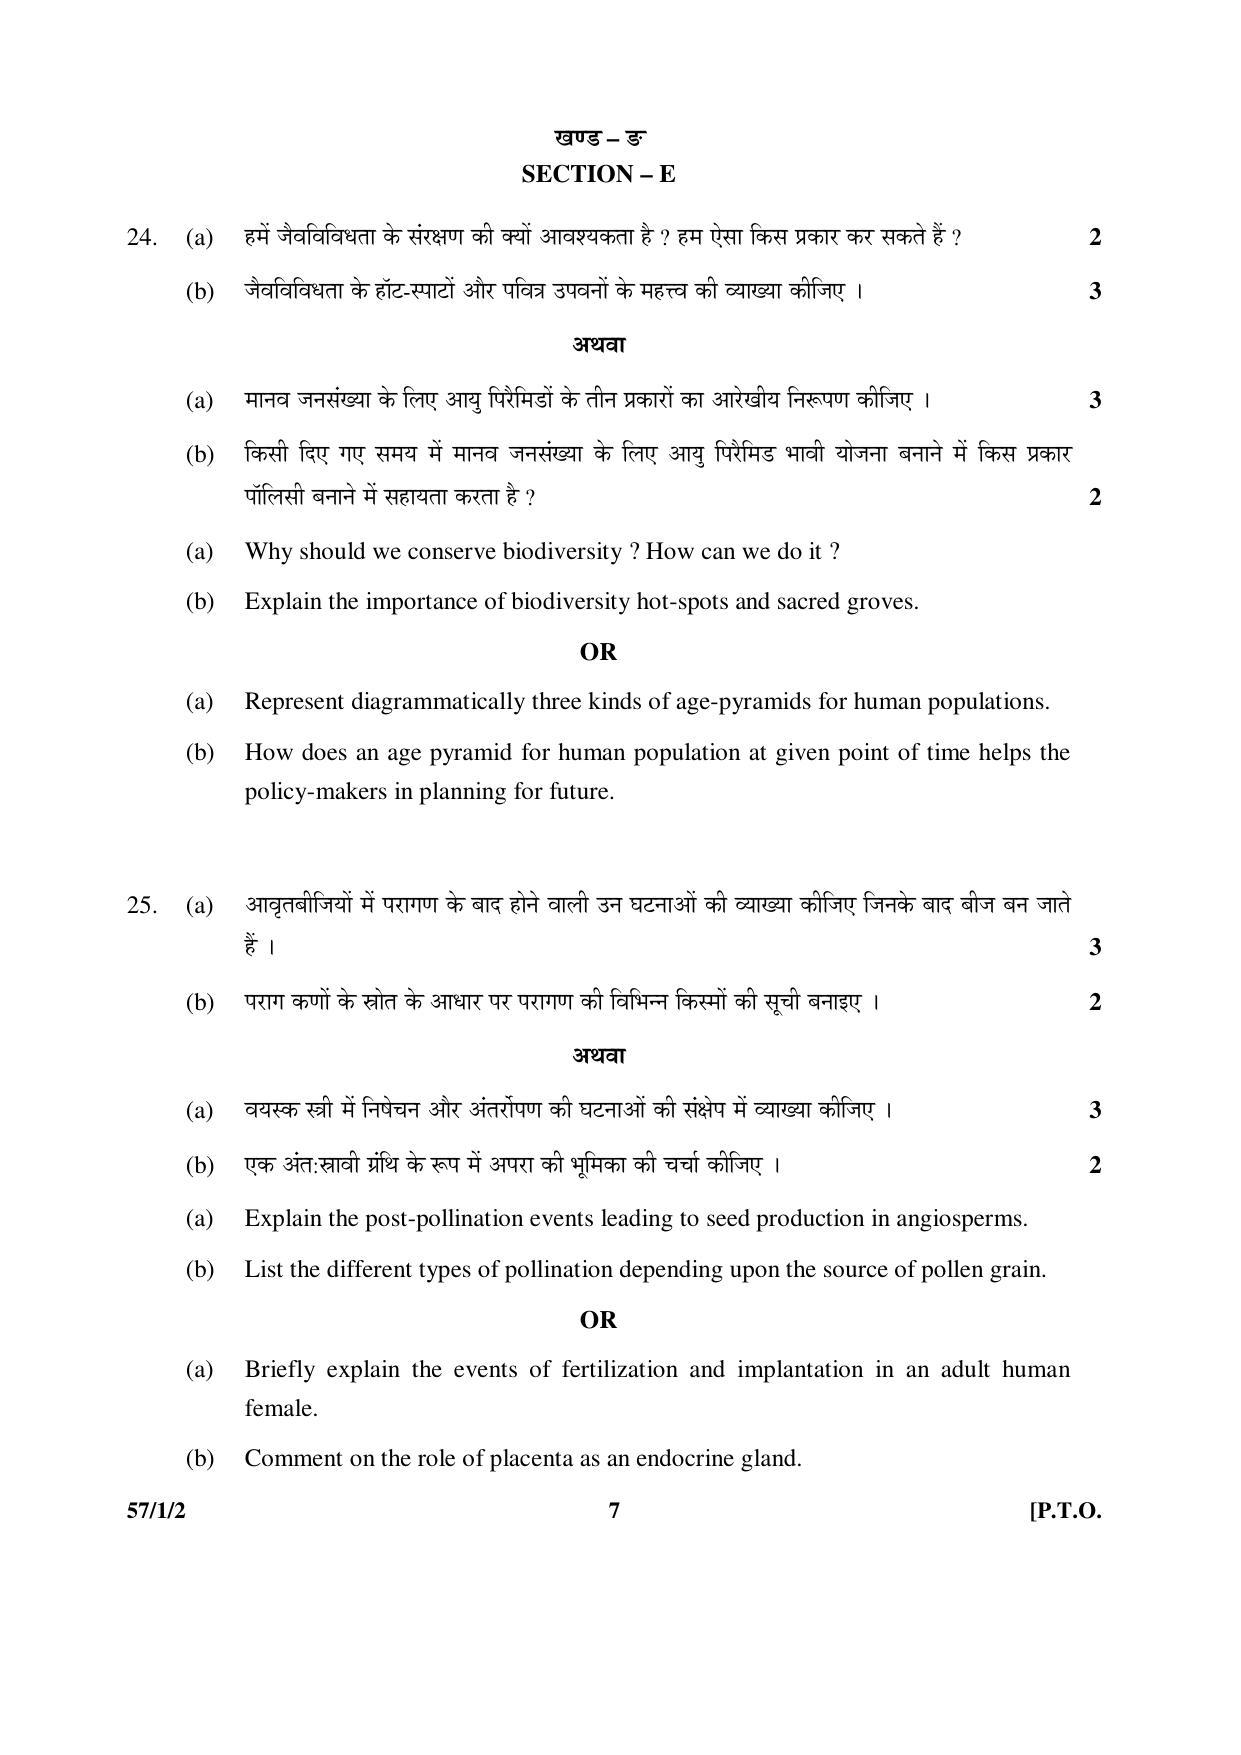 CBSE Class 12 57-1-2 BIOLOGY 2016 Question Paper - Page 7